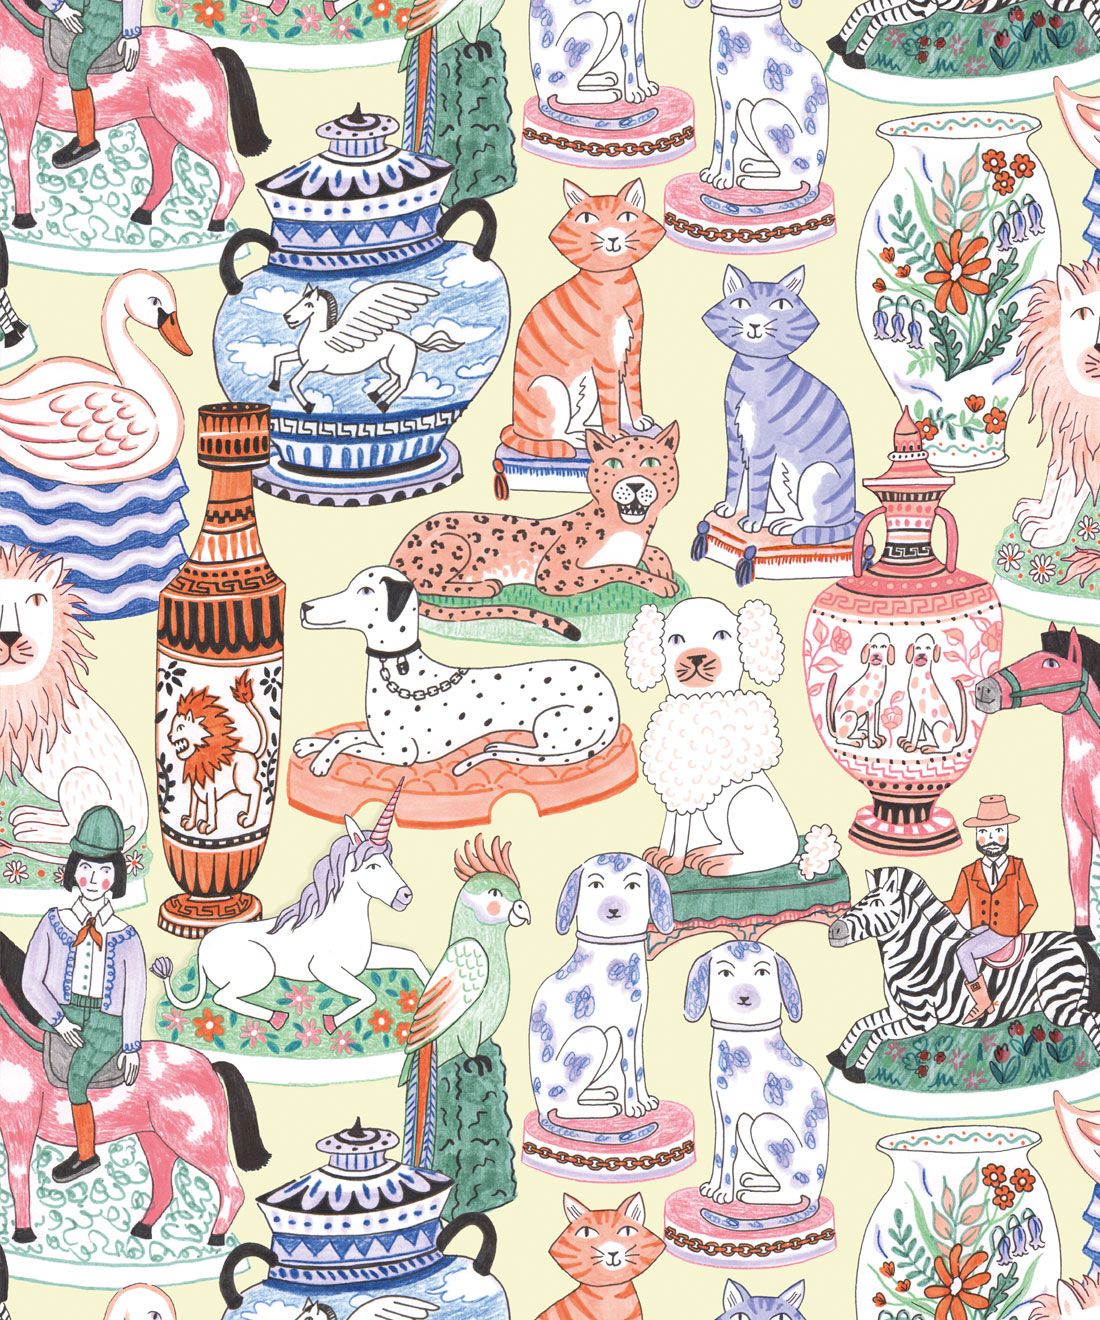 Ceramics Wallpaper featuring vases of dogs, cats, zebras, lions, parrots and unicorns swatch